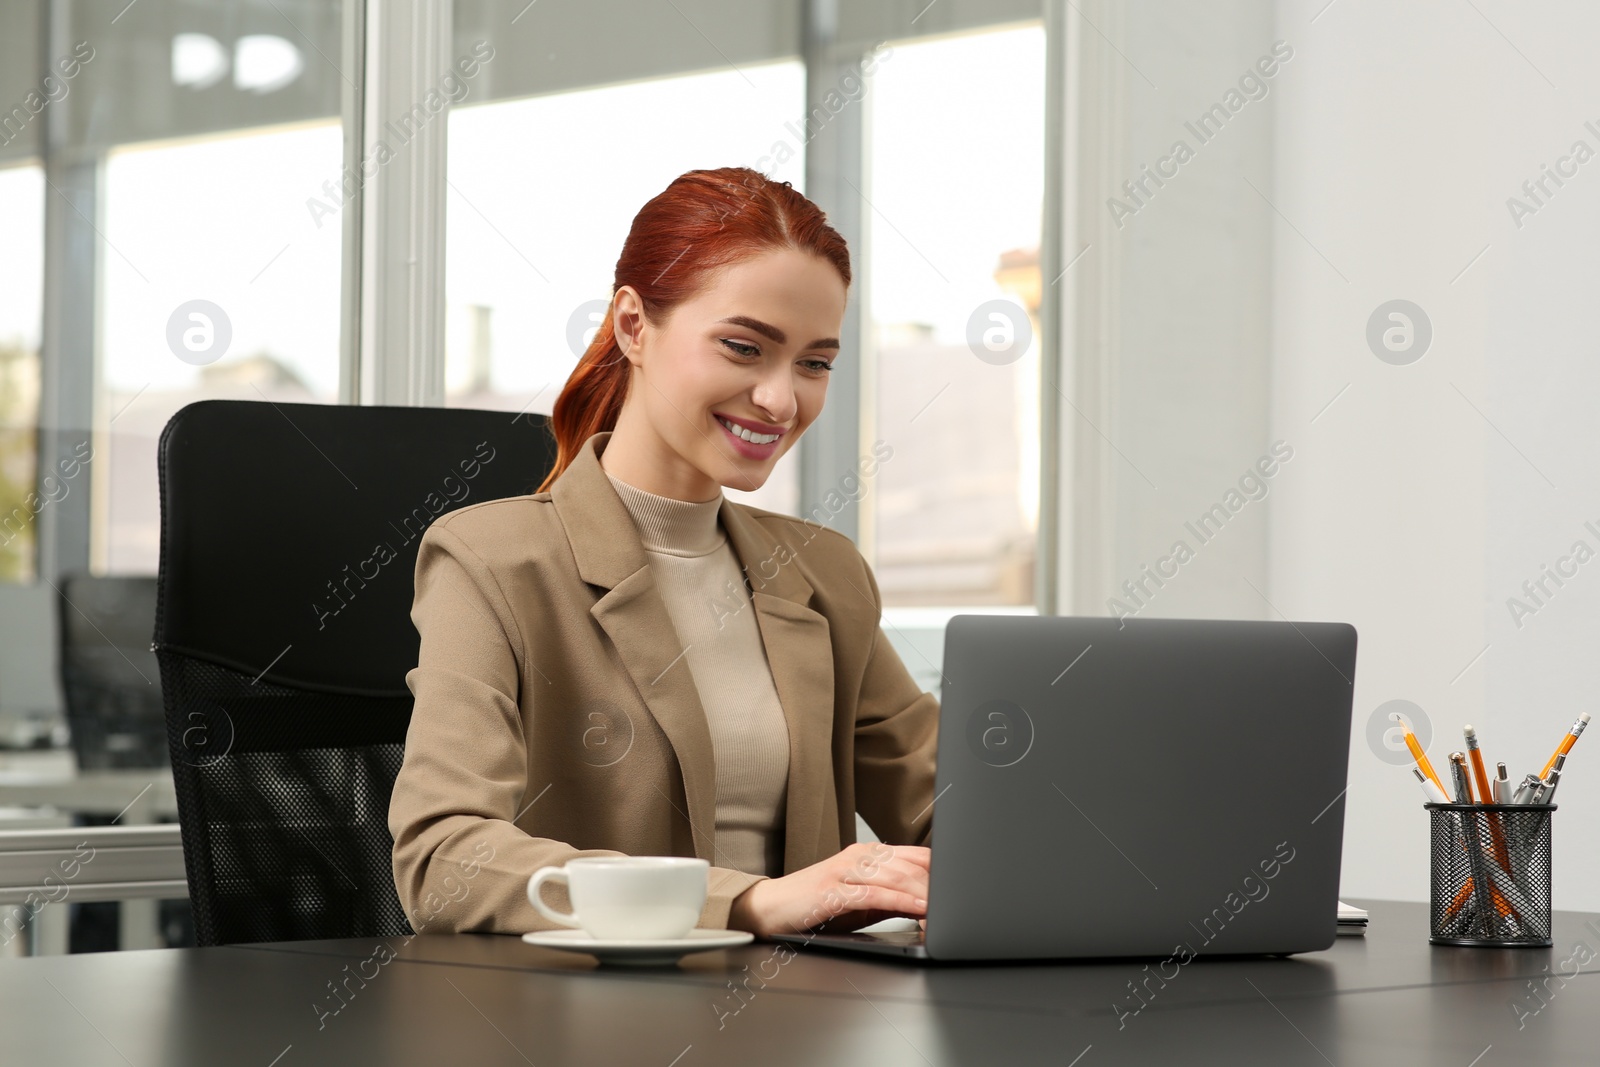 Photo of Happy woman working with laptop at black desk in office